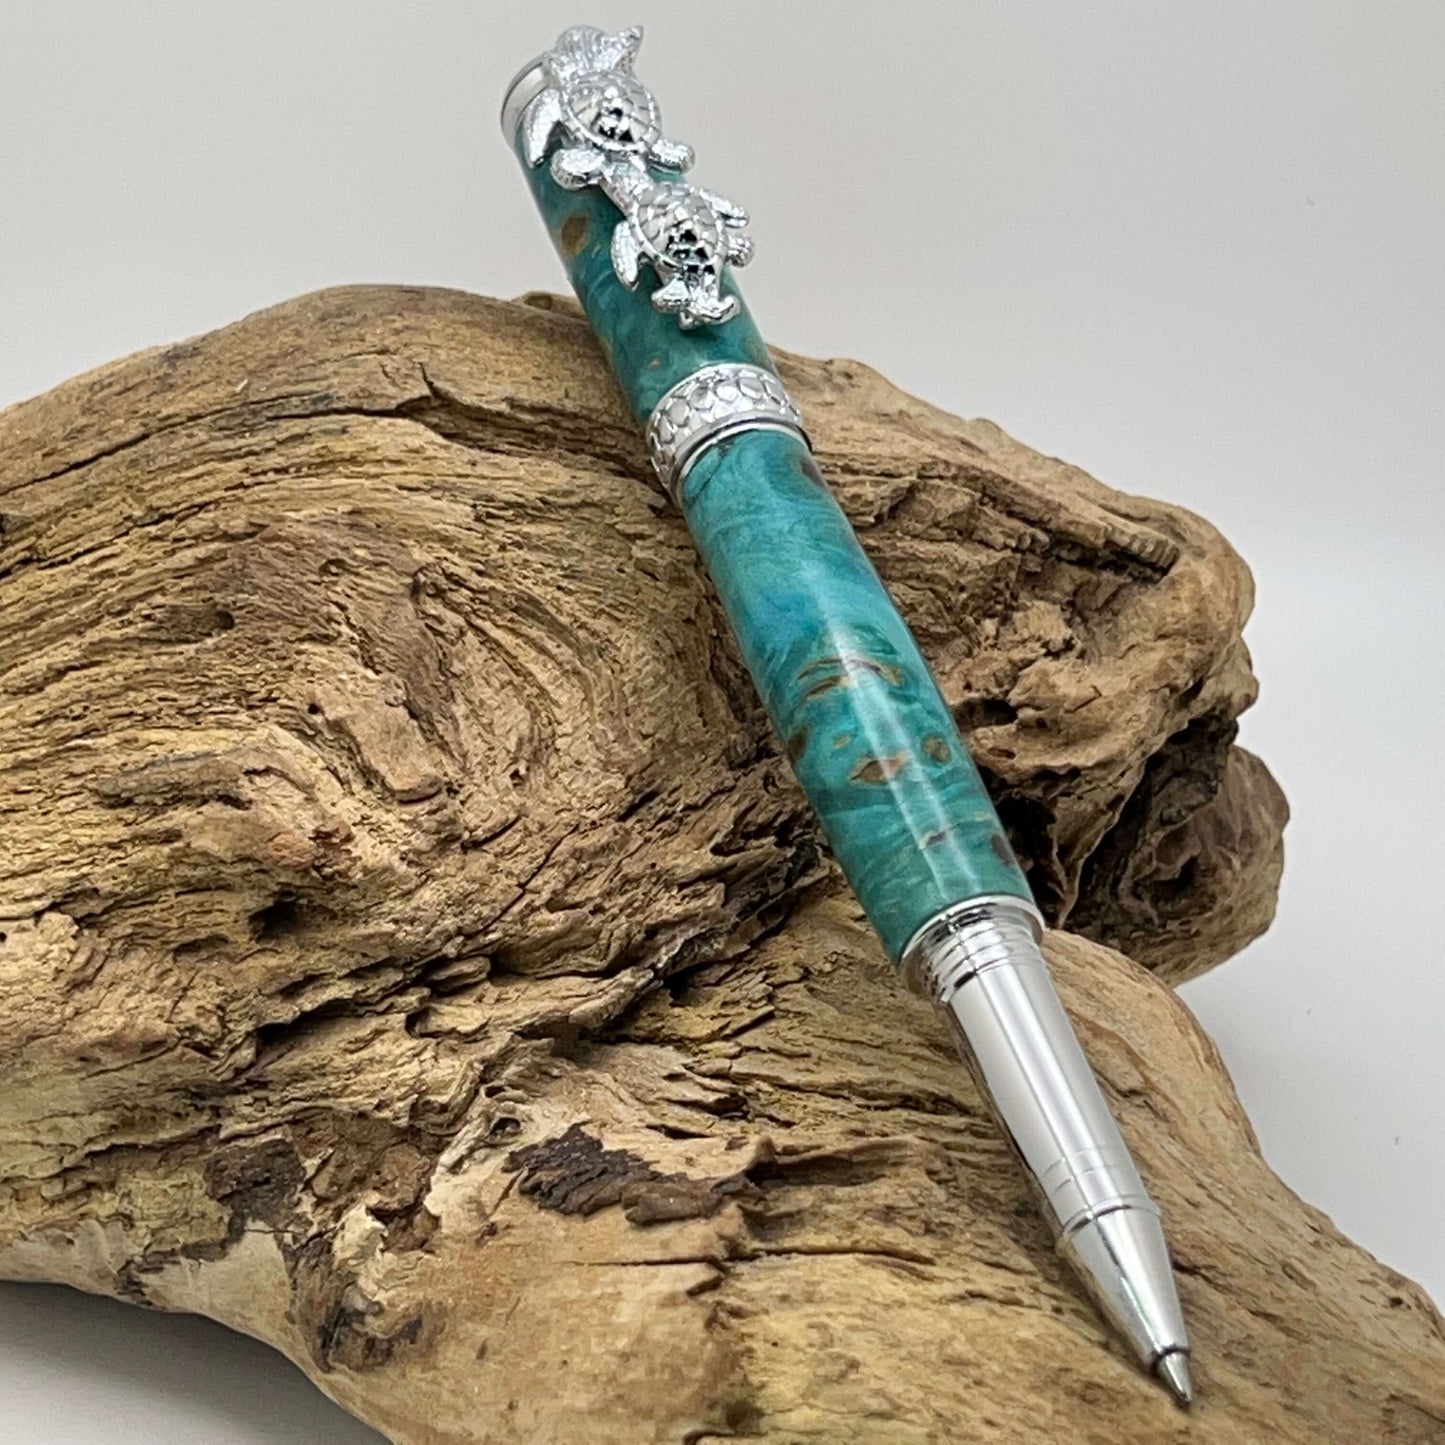 Handcrafted Box elder wood pen dyed turquoise with turtle cap setting on driftwood